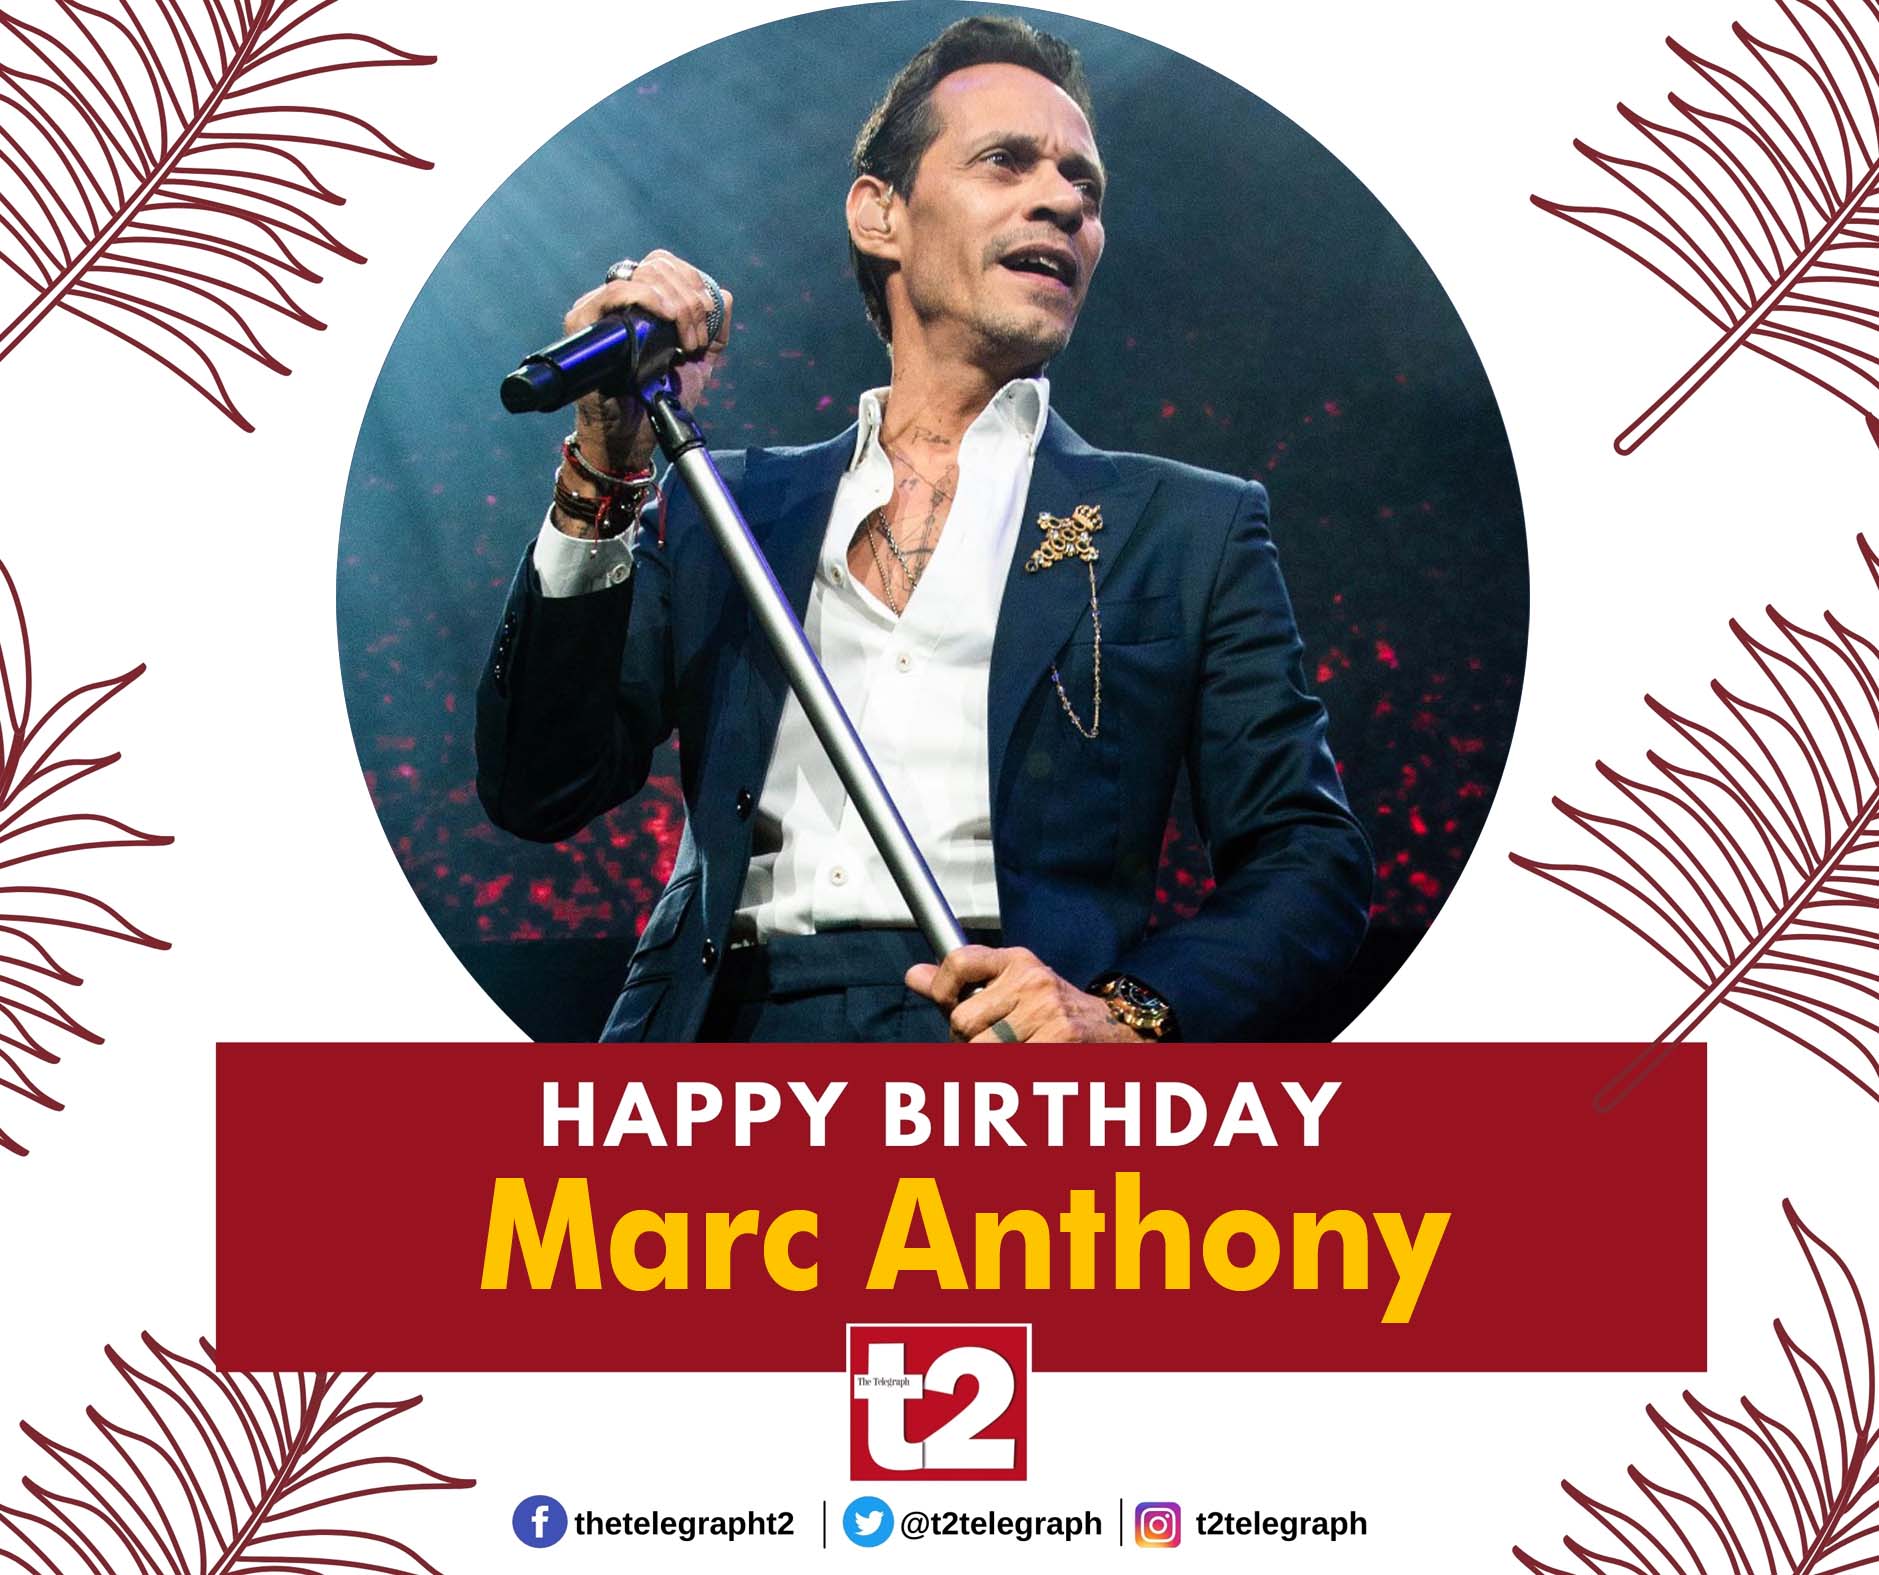 Happy birthday Marc Anthony and thanks for all the salsa-infused full-band music 